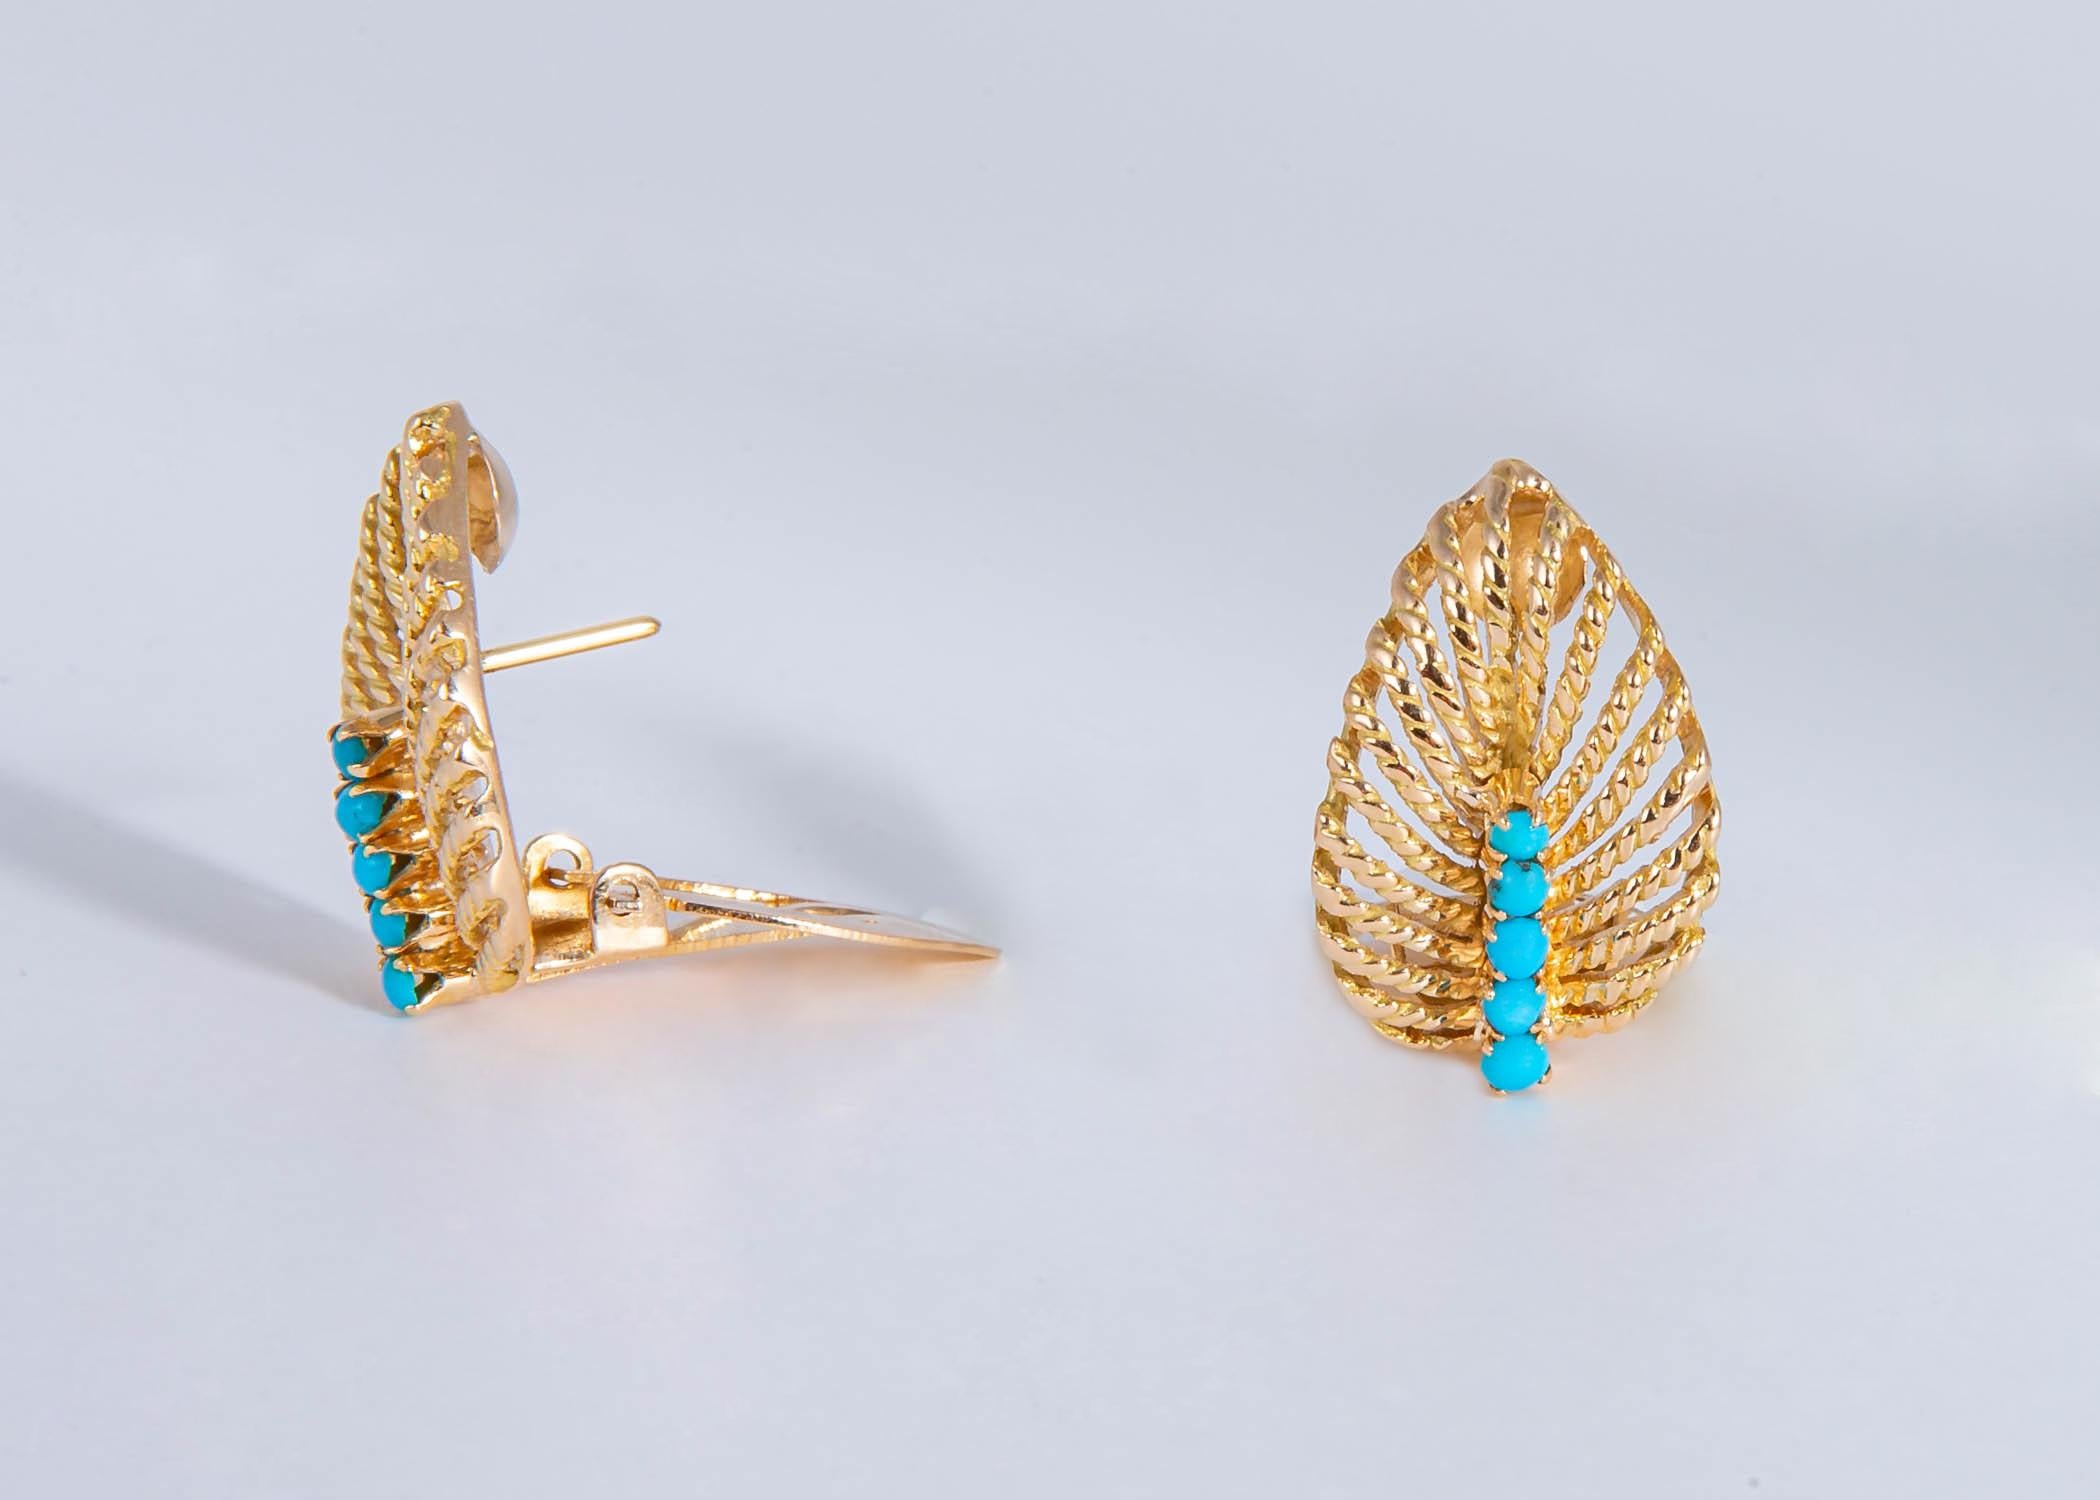 Rich 18k gold is beautifully detailed into an open work leaf design and accented with vivid turquoise.  7/8's of an inch in length.